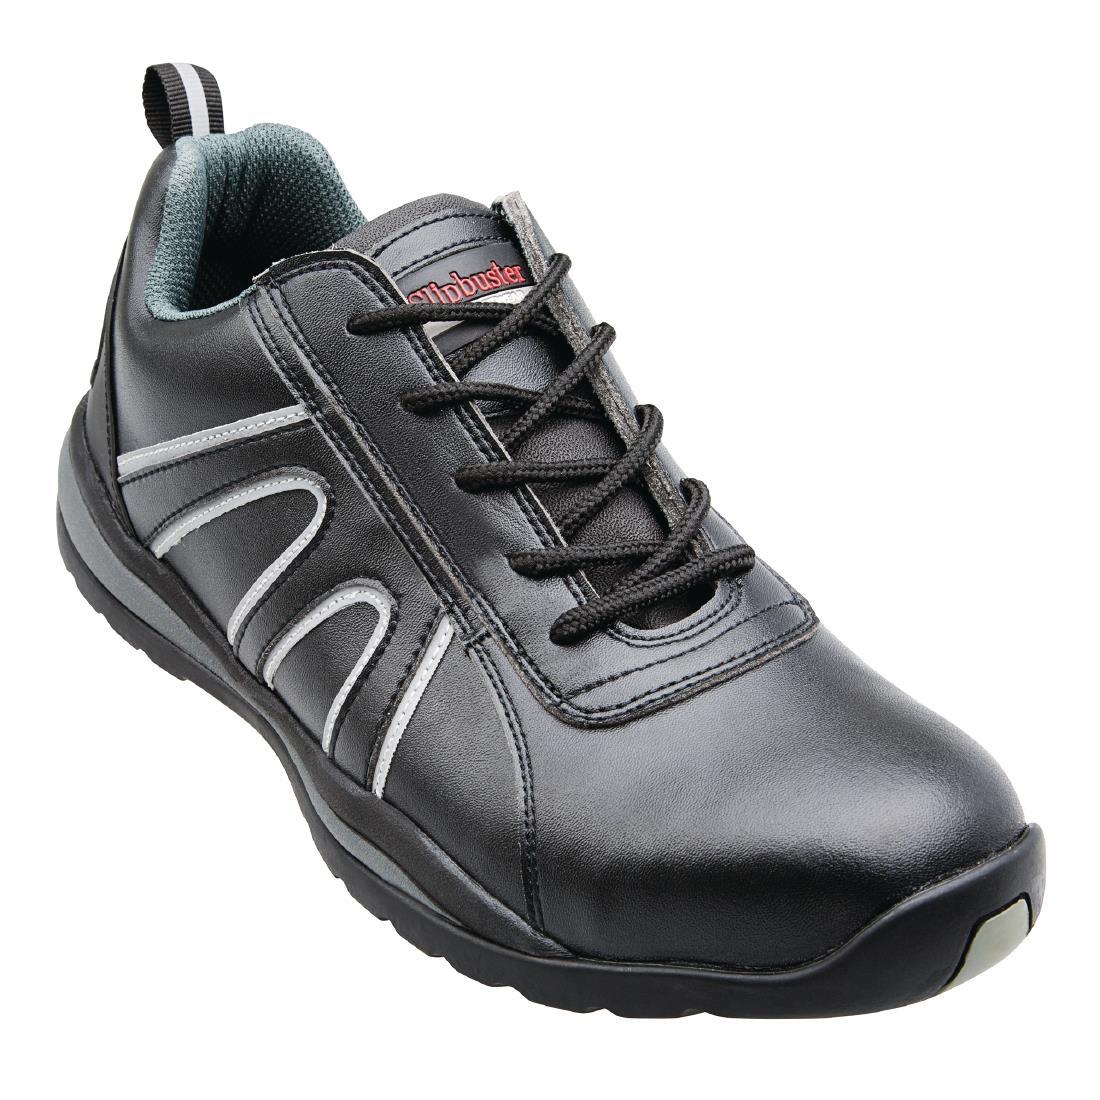 Slipbuster Safety Trainers Black 36 - A708-36  - 6